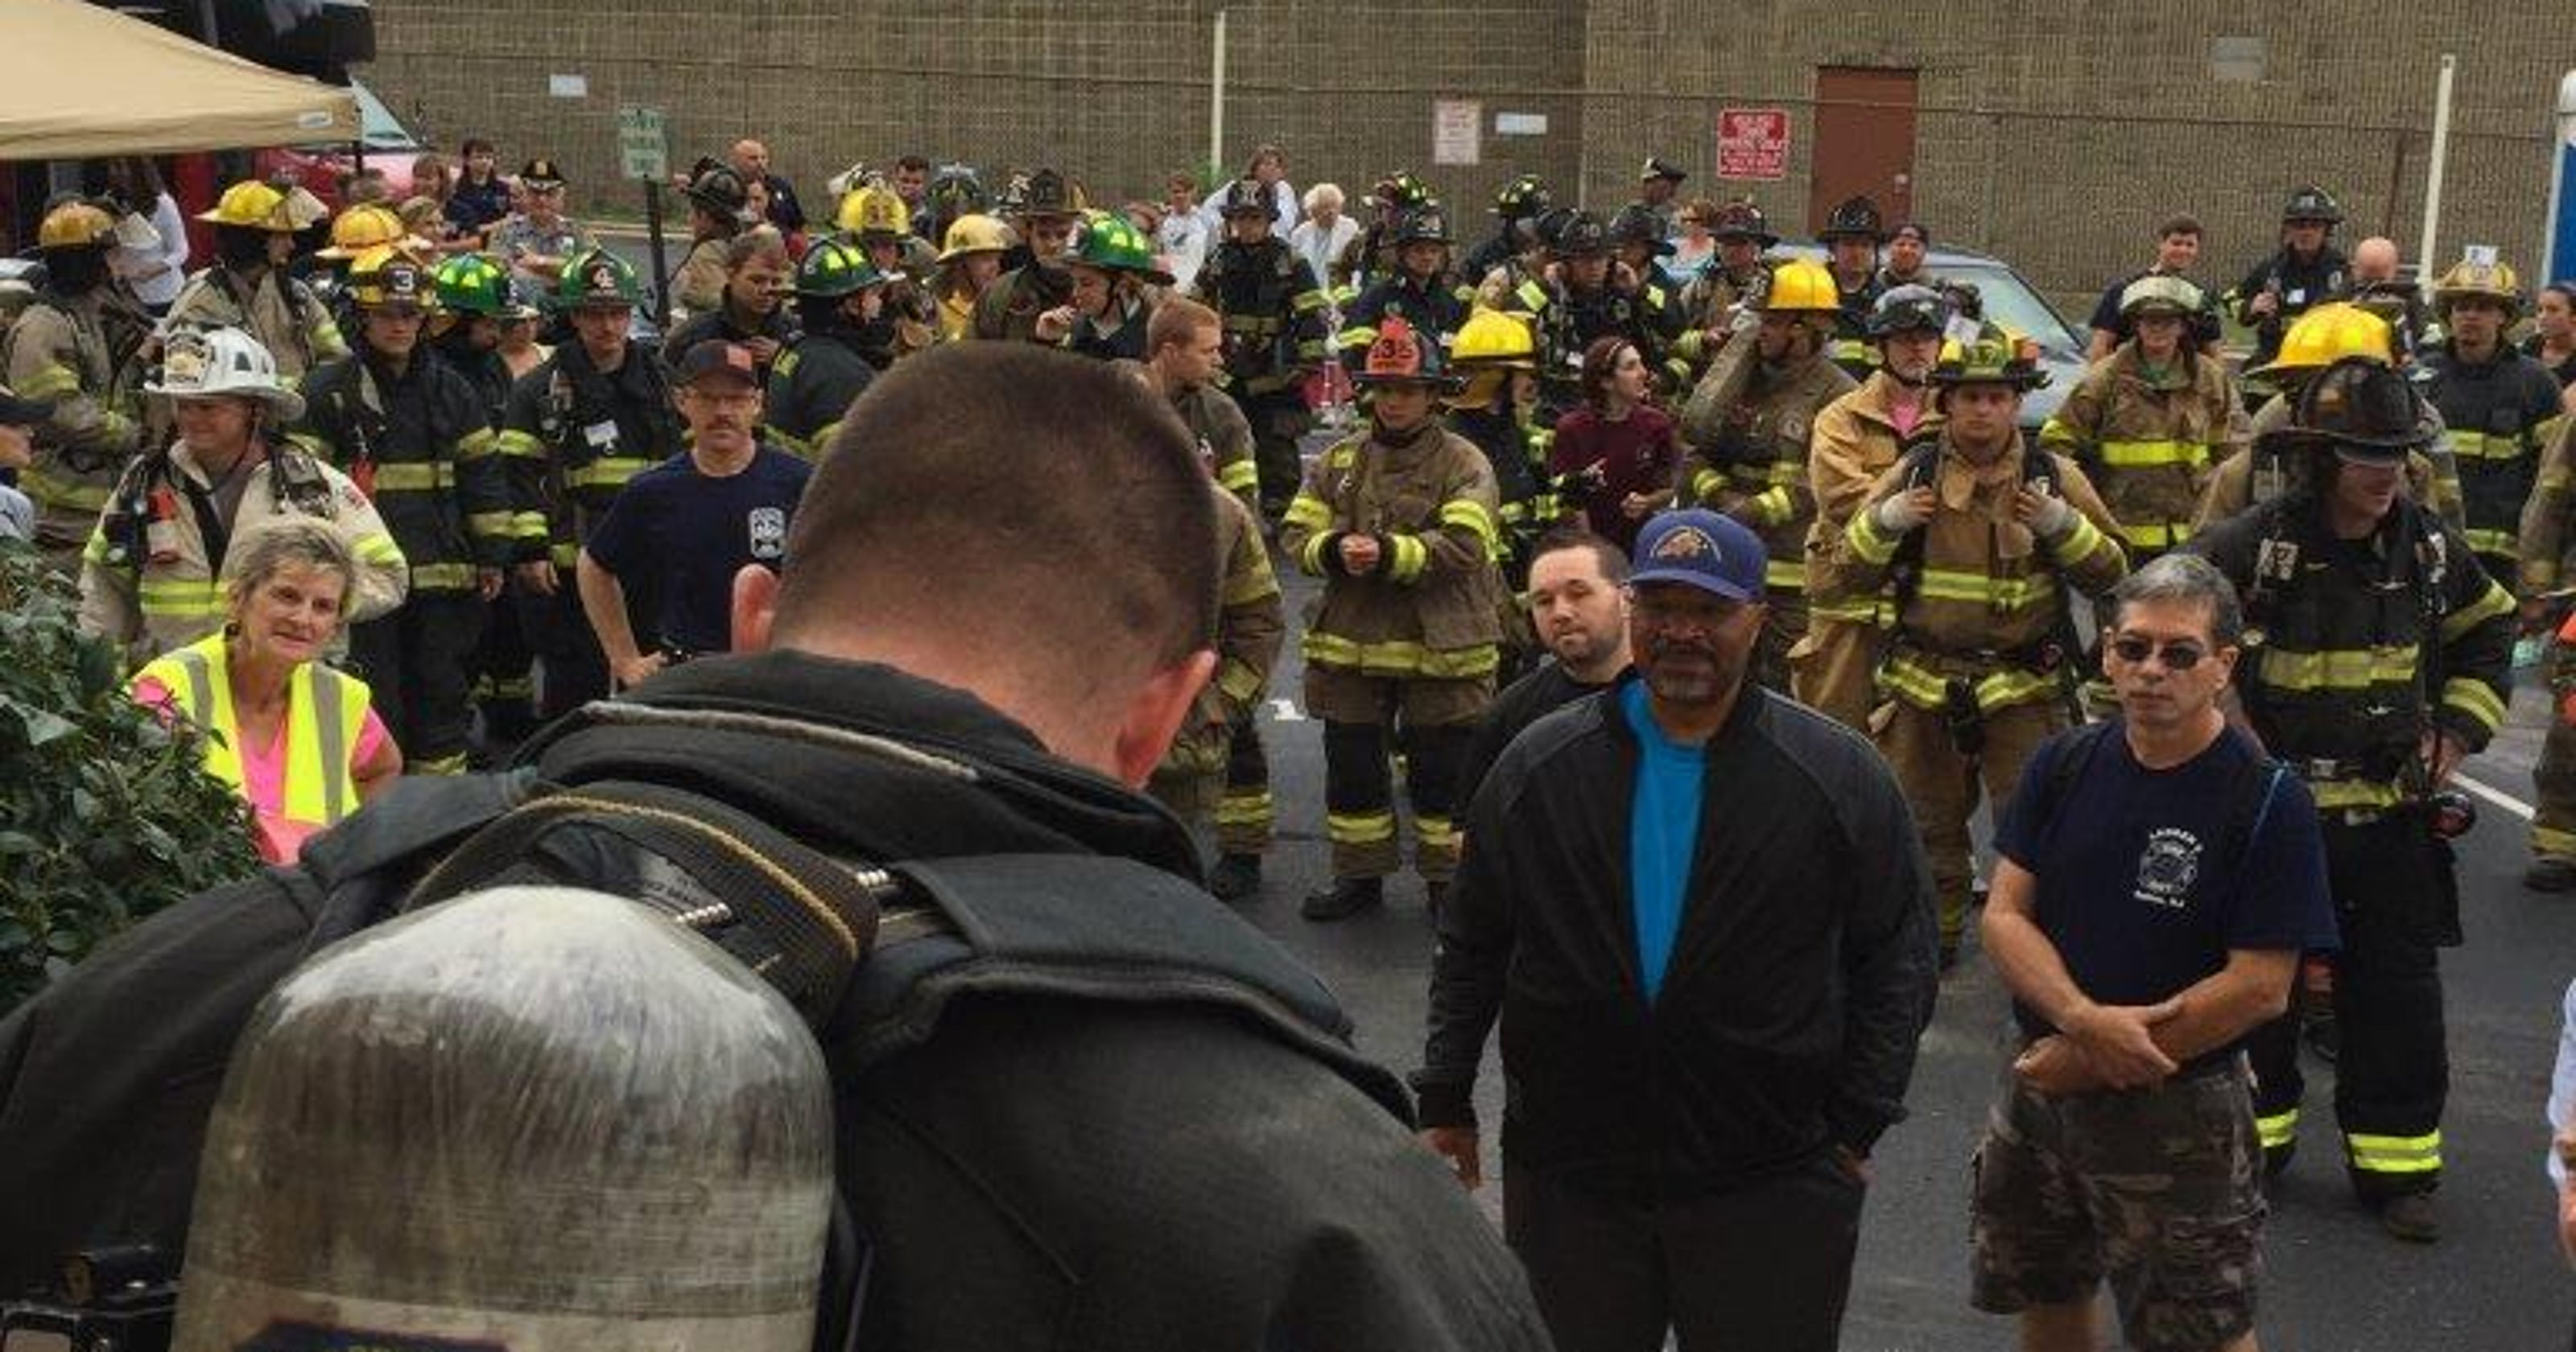 Firefighters Honor 911 Heroes With 110 Story Stair Climb